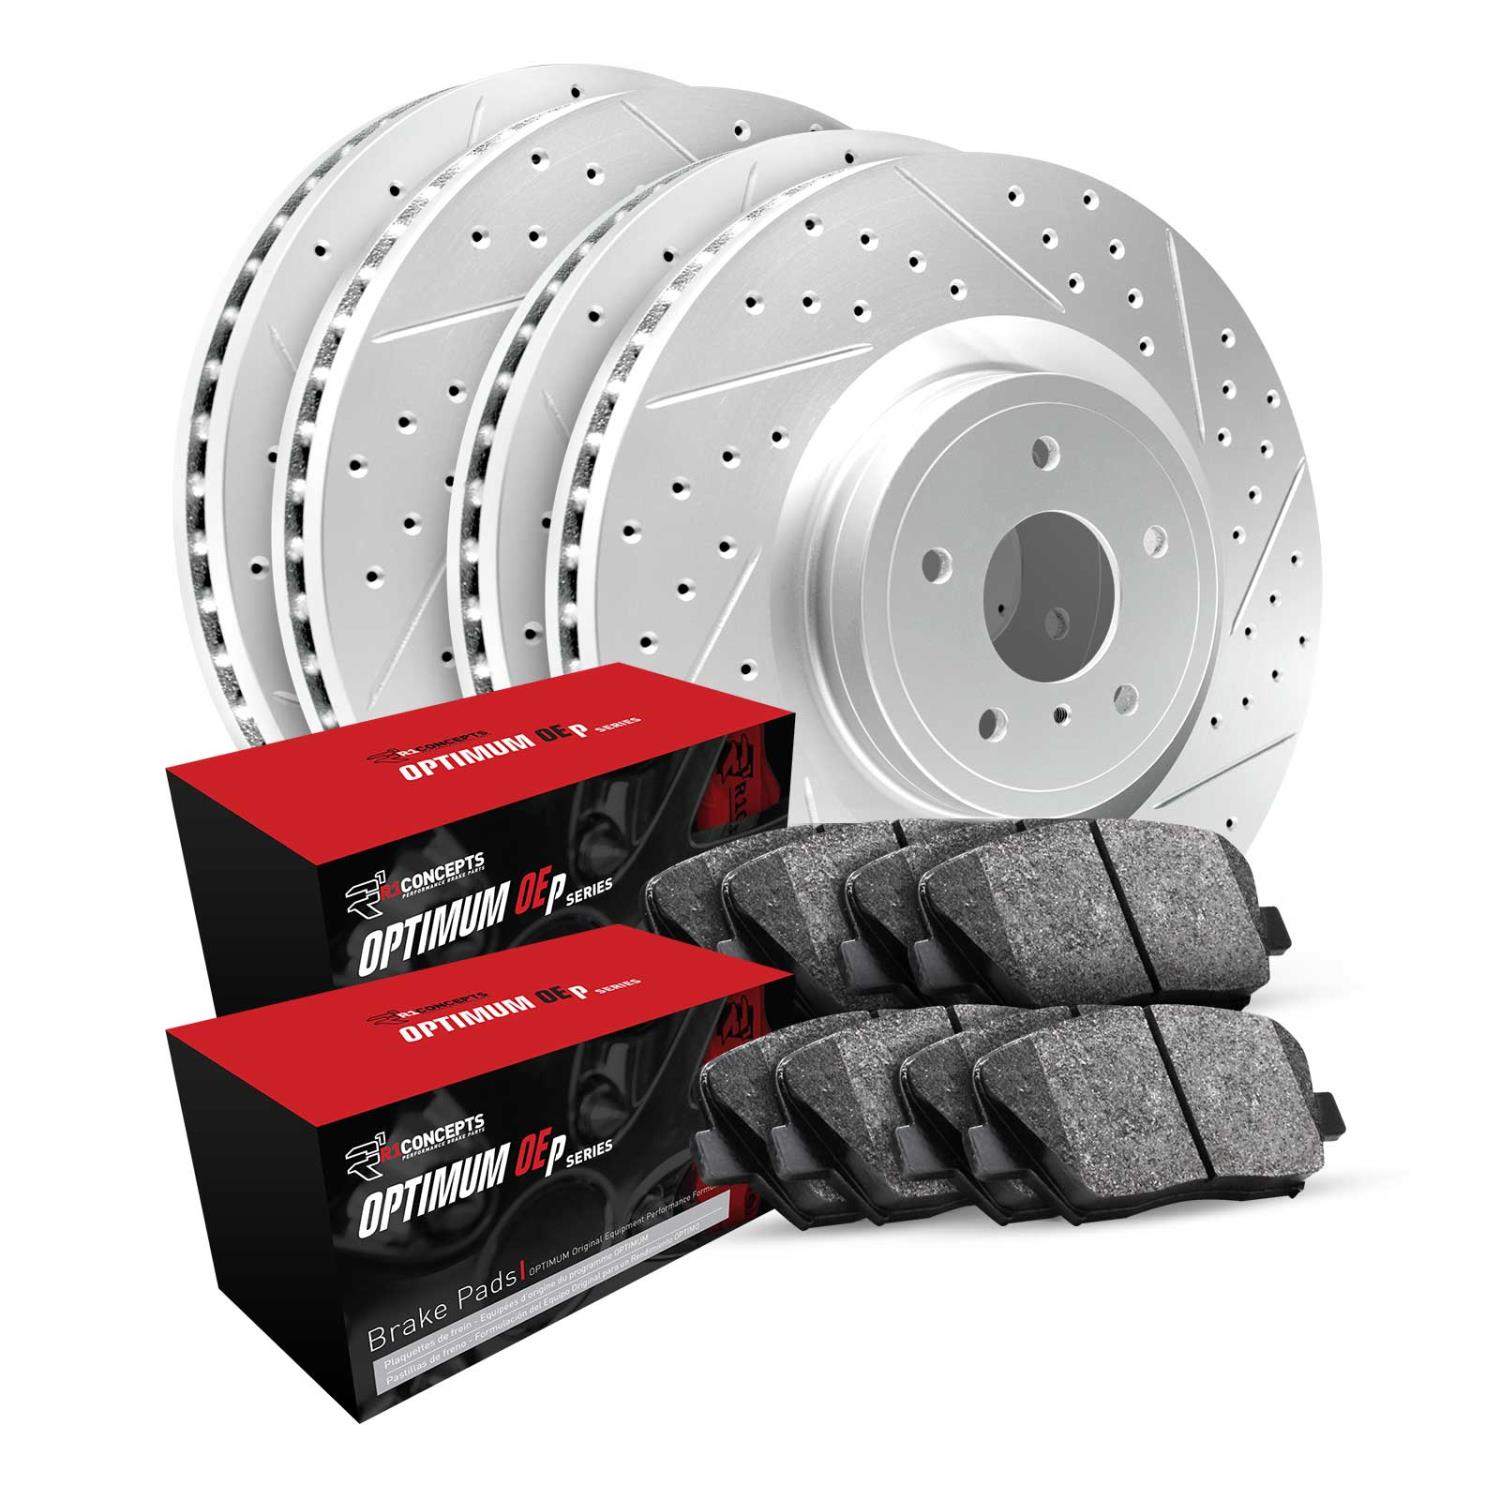 GEO-Carbon Brake Rotor Set w/Optimum OE Pads, 2014-2020 Fits Multiple Makes/Models, Position: Front & Rear